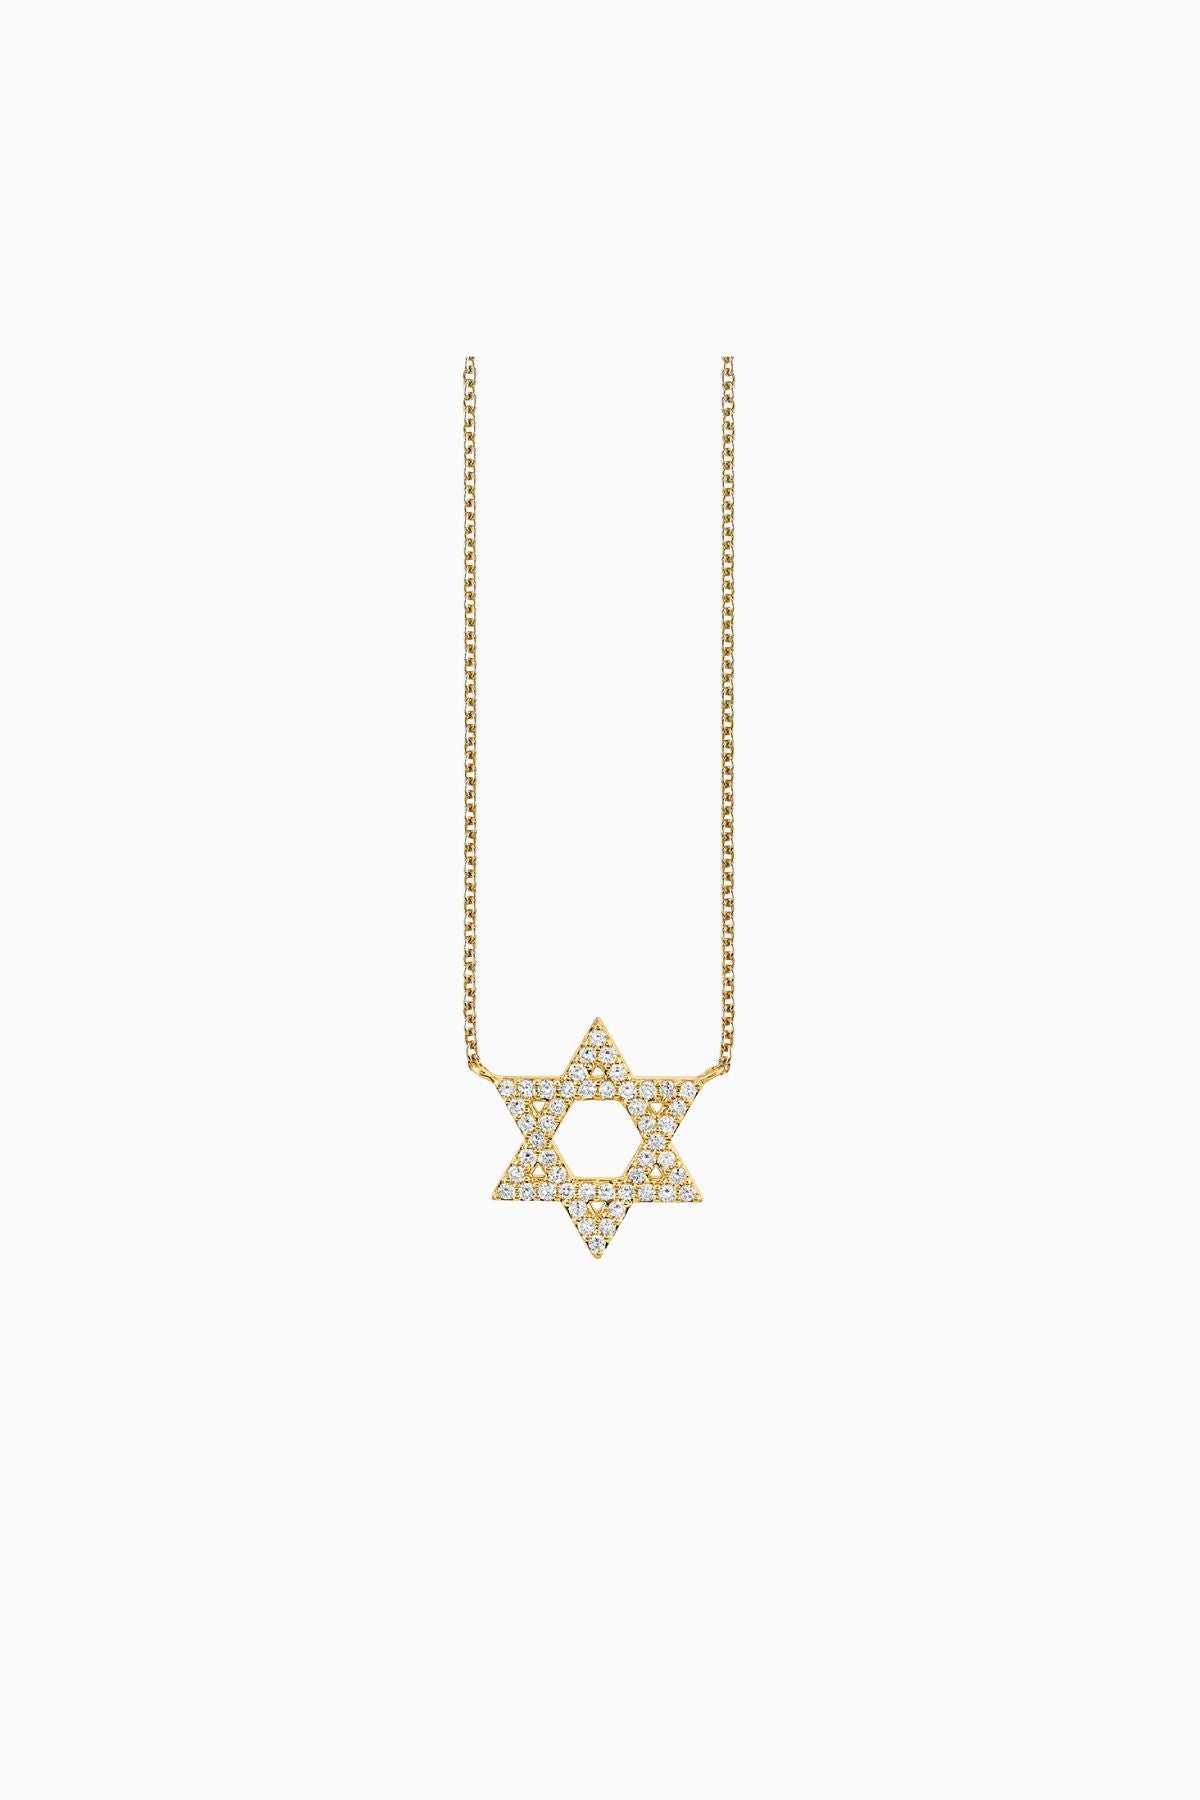 Sydney Evan Star of David Simple Necklace - Yellow Gold